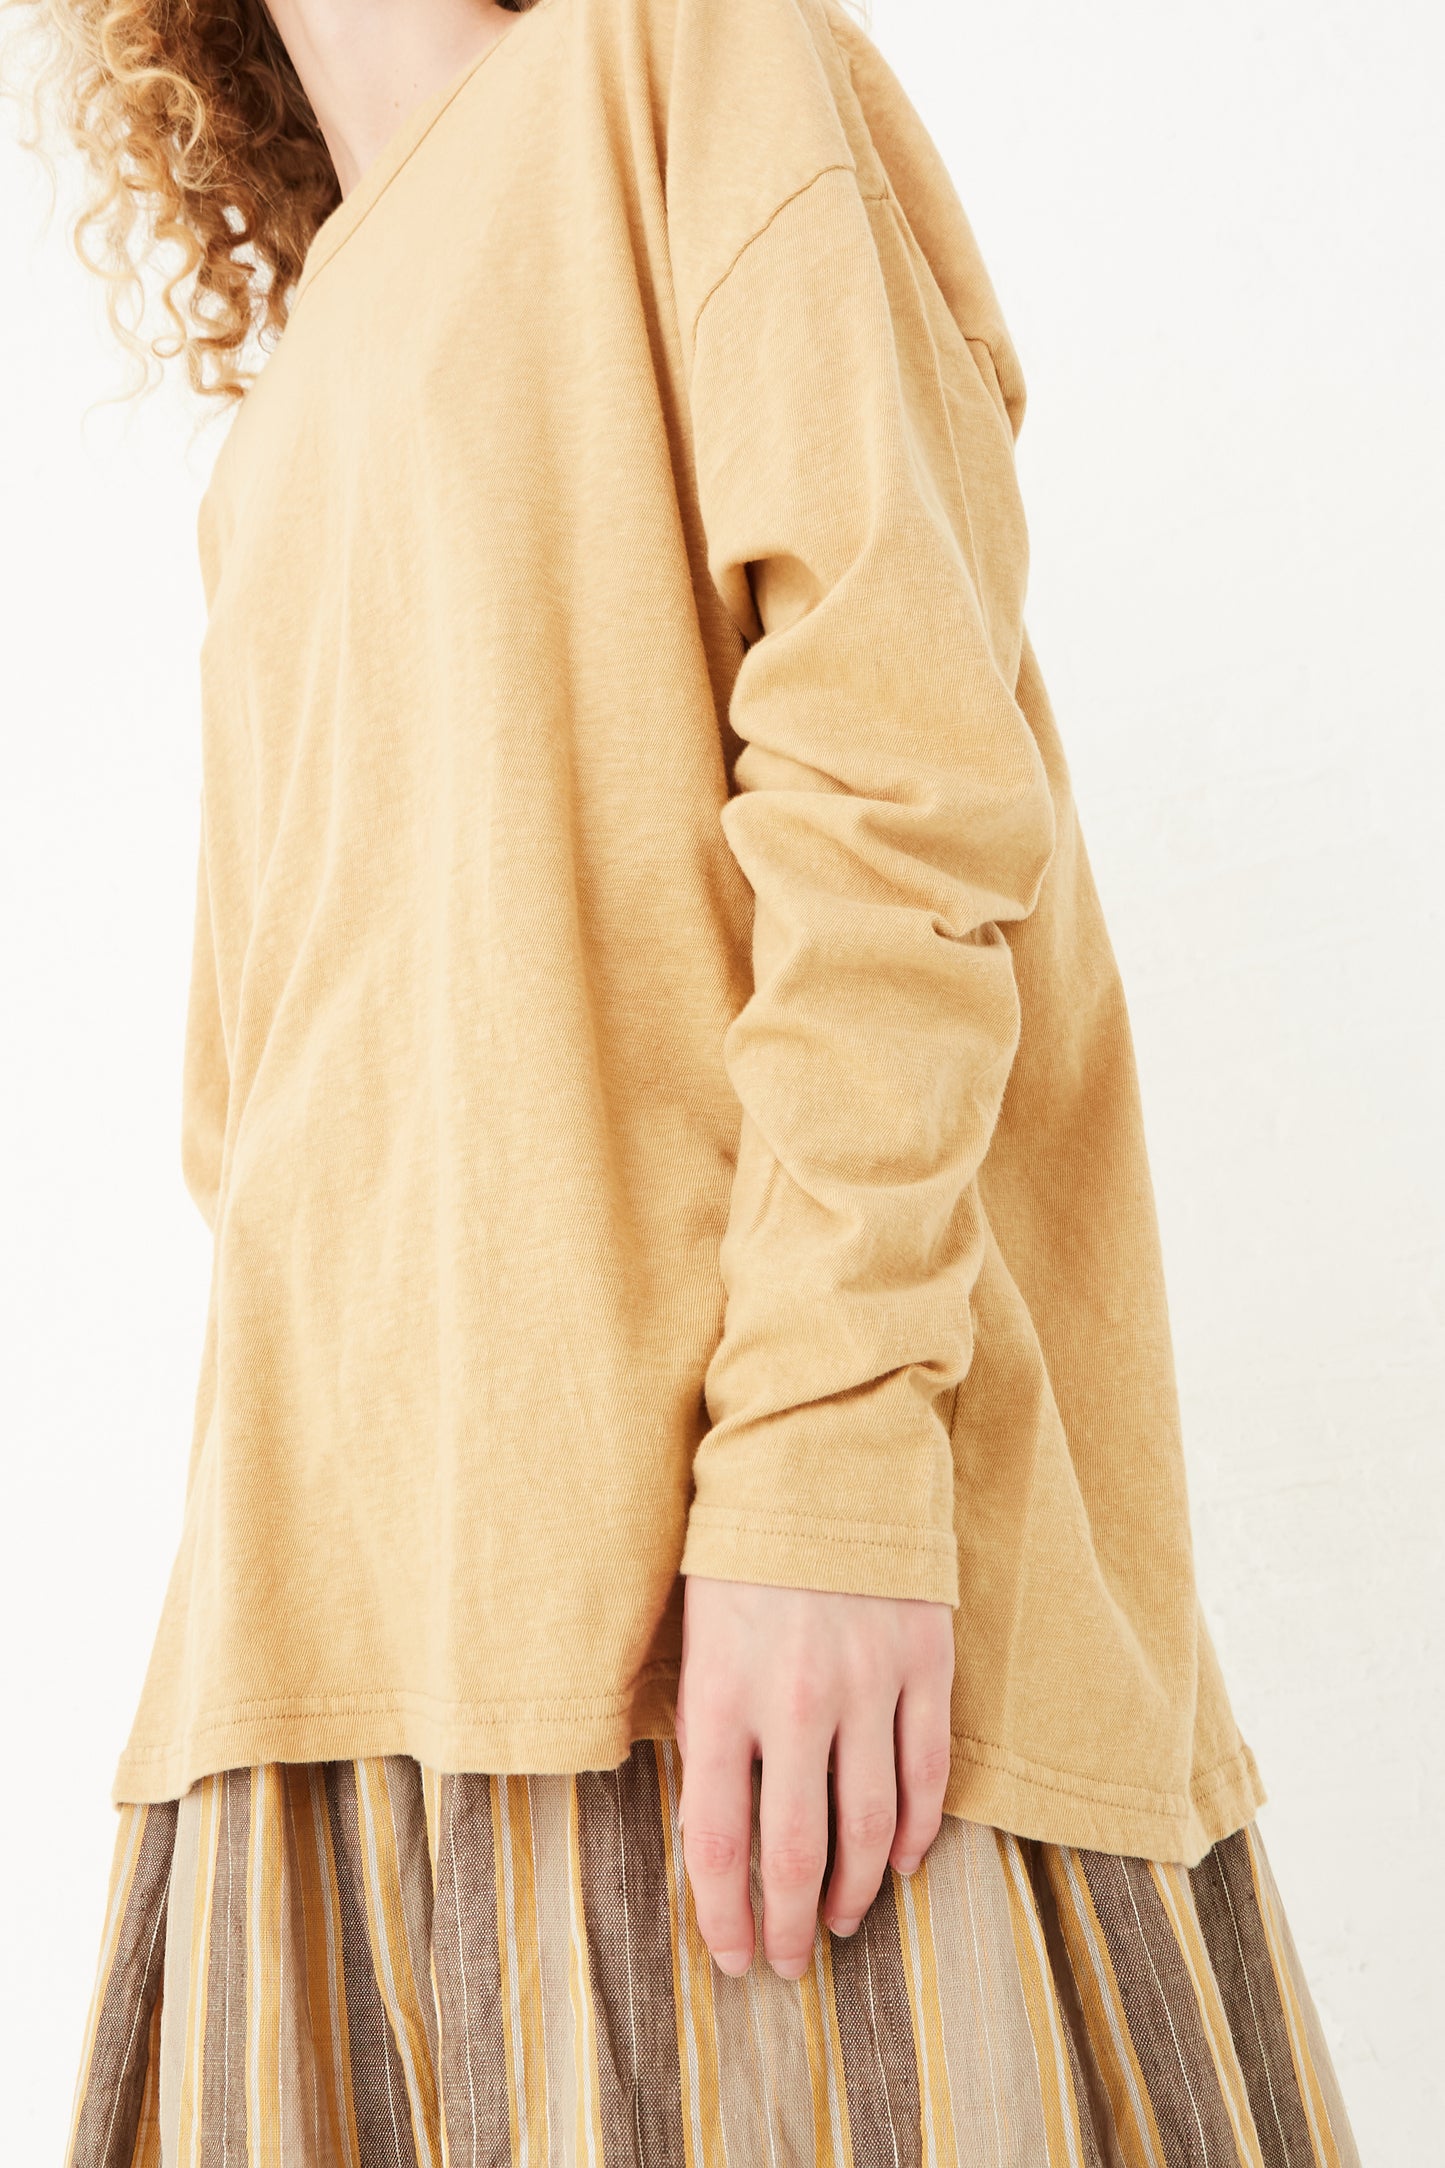 A model wearing an Ichi Antiquités Cotton Loose Pullover in Camel, available at Oroboro store in NYC.